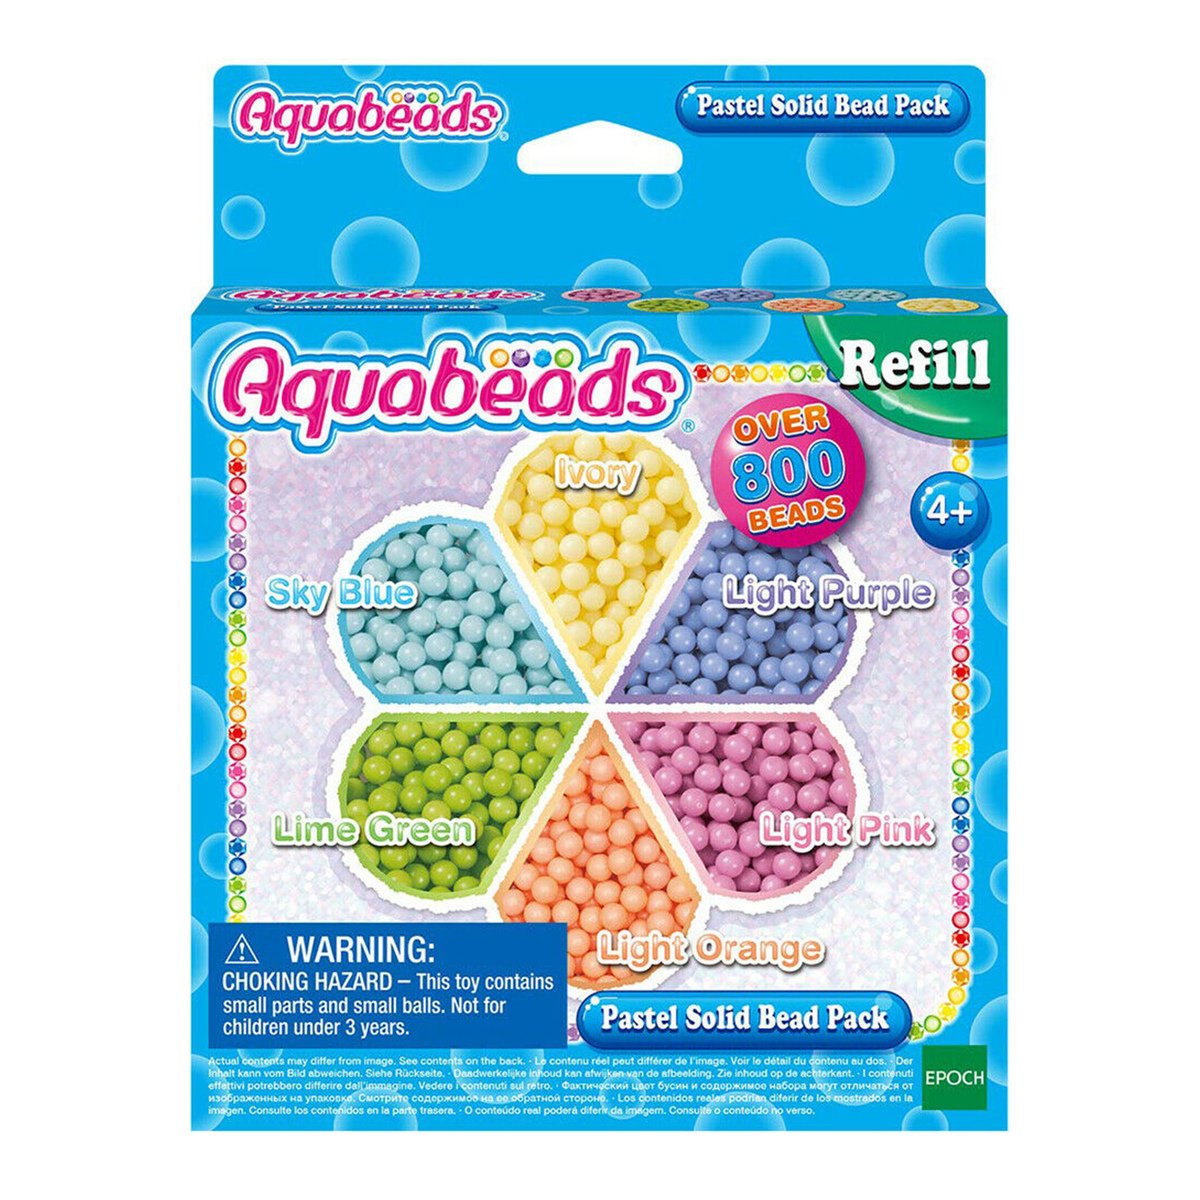 Aquabeads Pastel Solid Bead Pack 31360